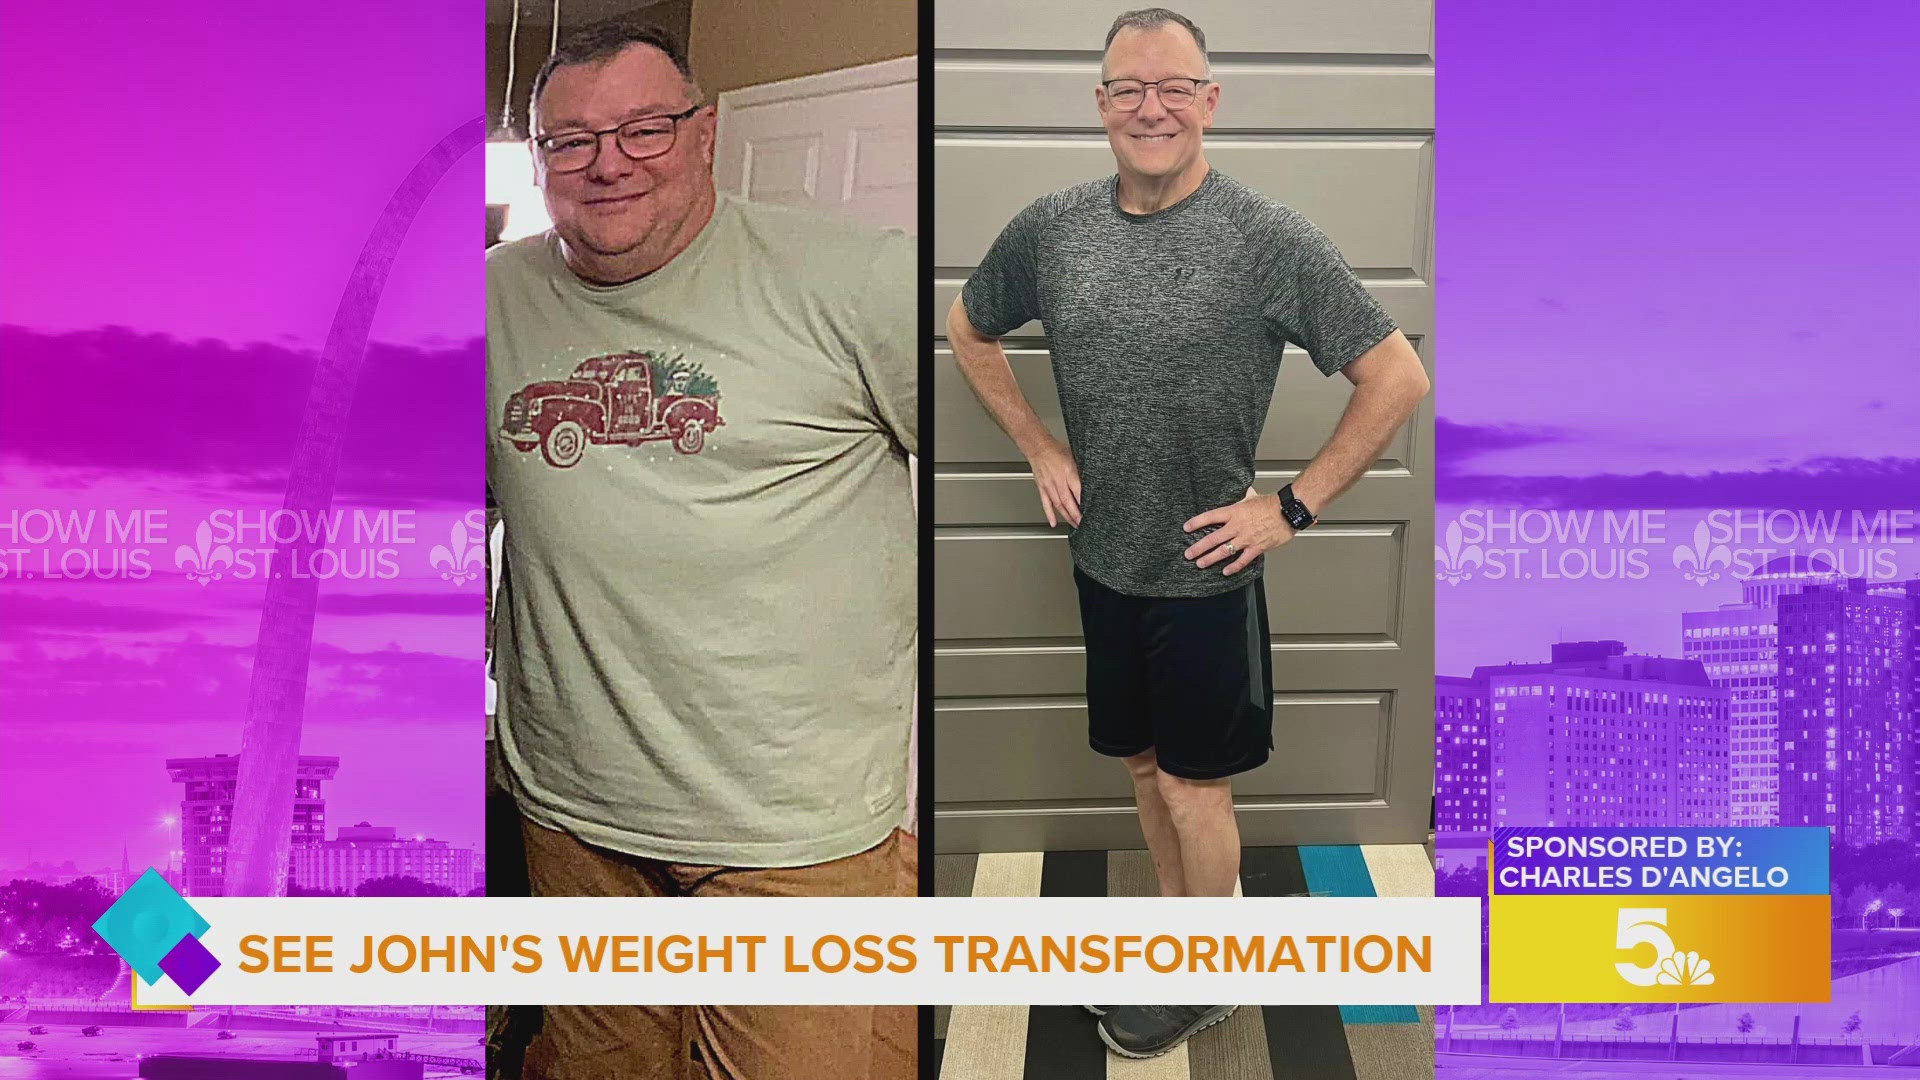 John has been working with Charles D'Angelo since January to make this year his healthiest year yet. See his transformation as he joins us live in our studio.